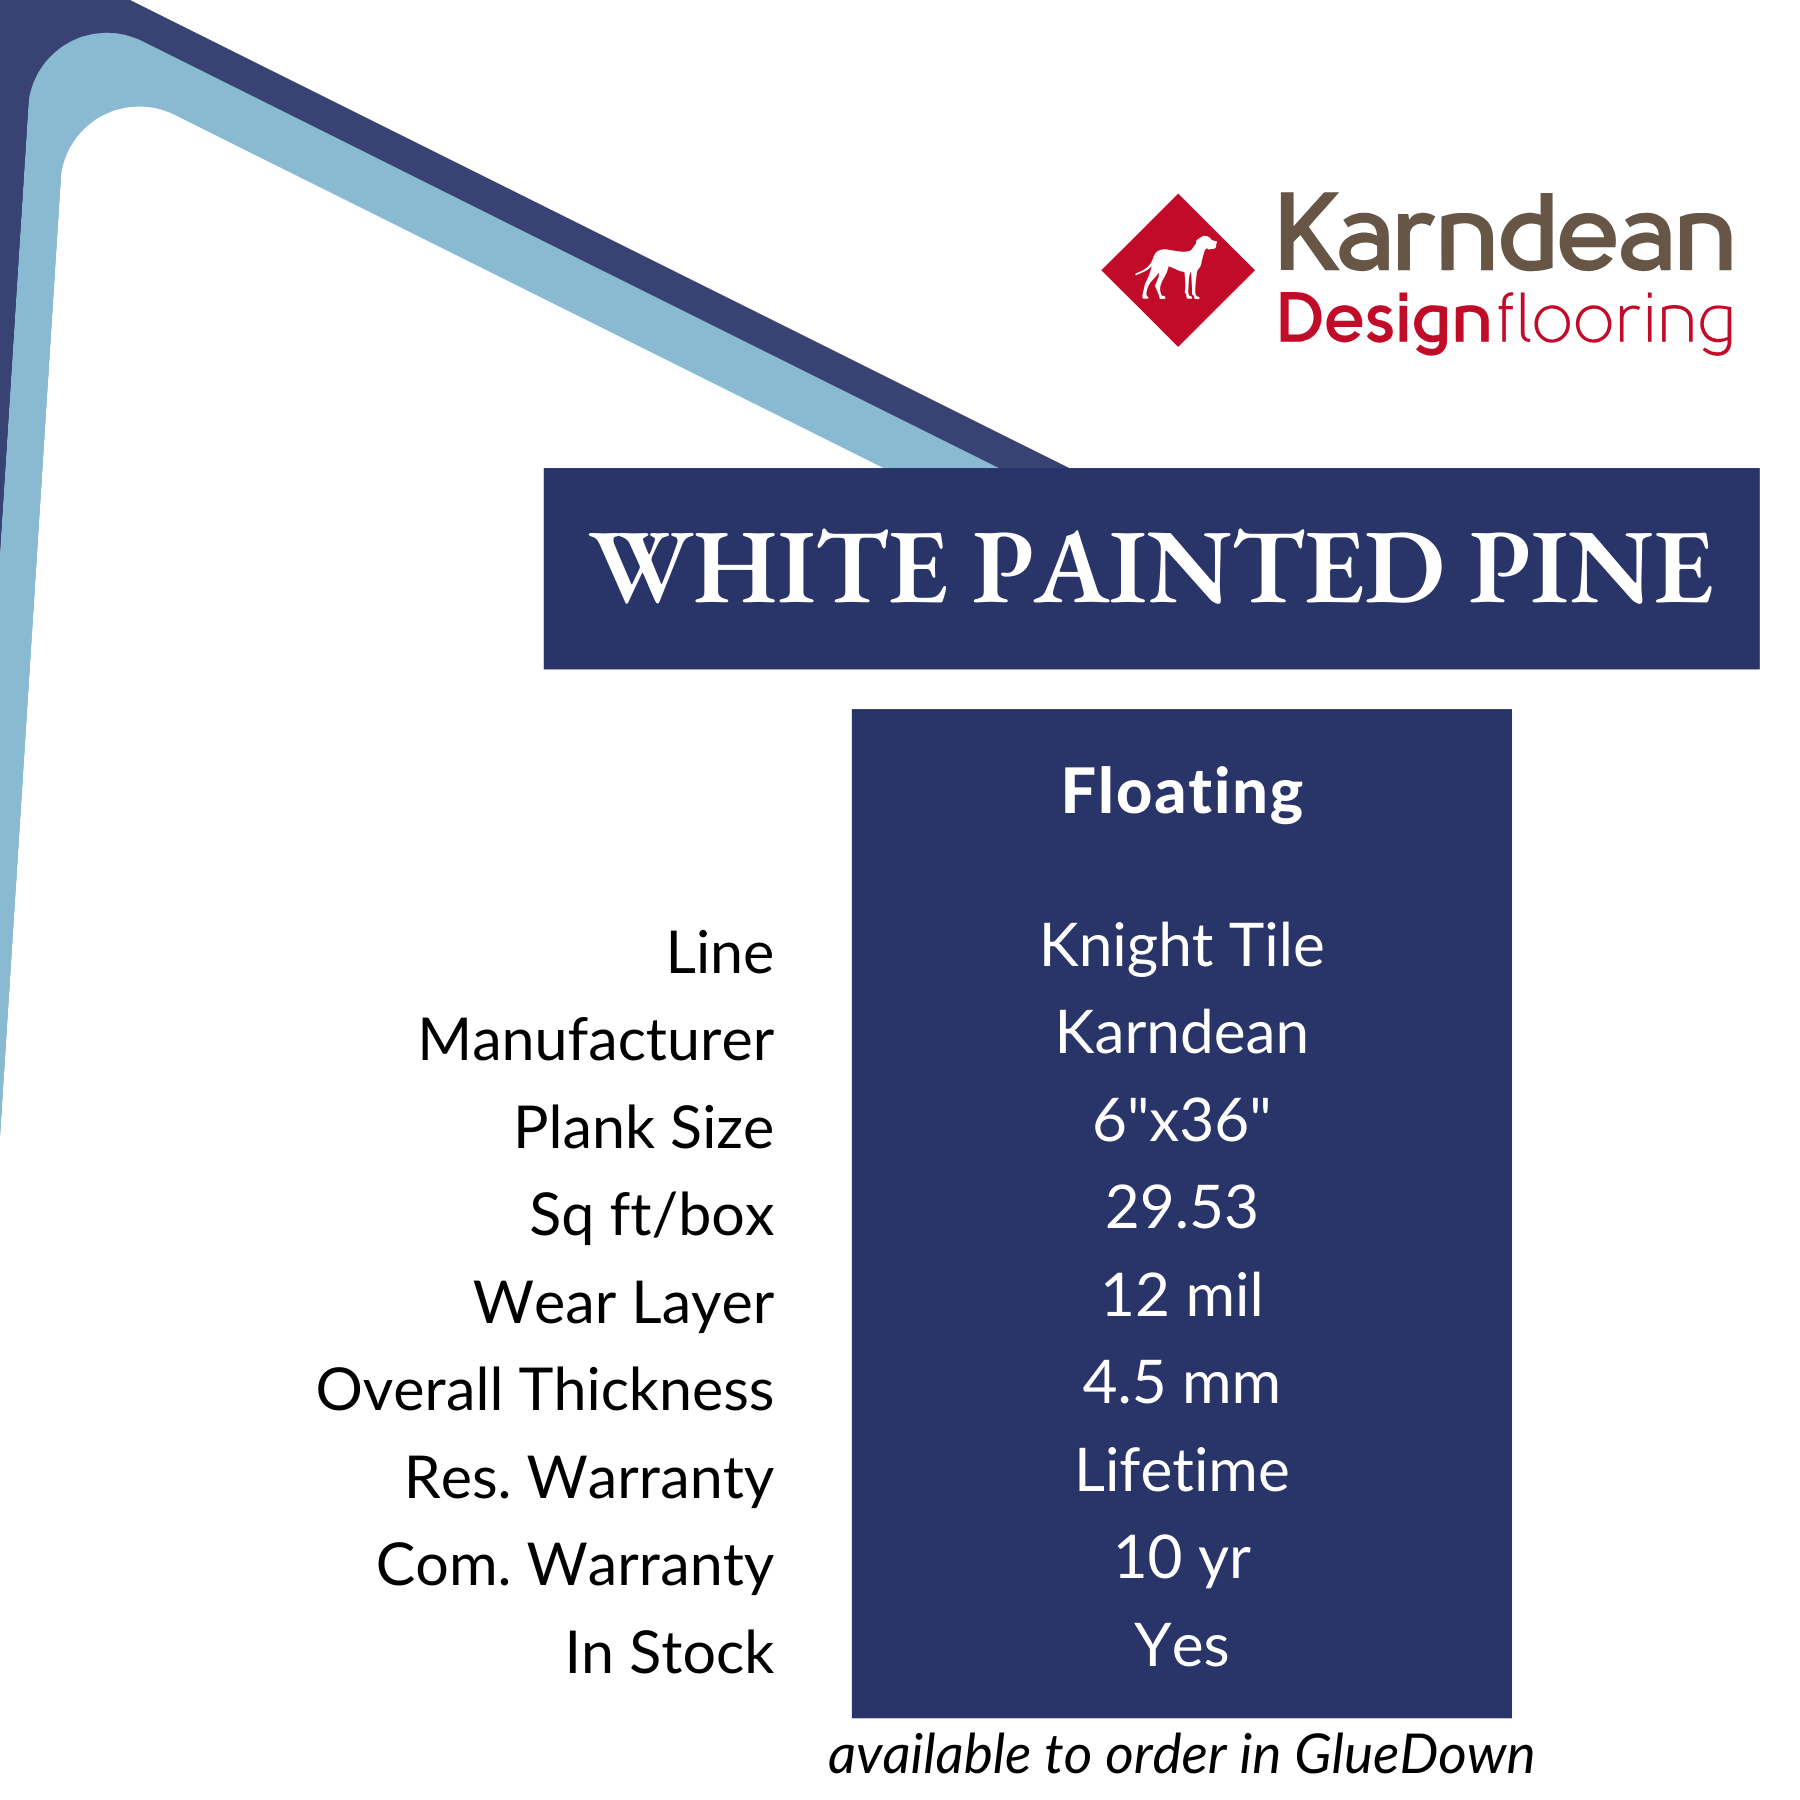 White Painted Pine Vinyl Flooring from Karndean, sold at Calhoun’s, Springfield, IL specs